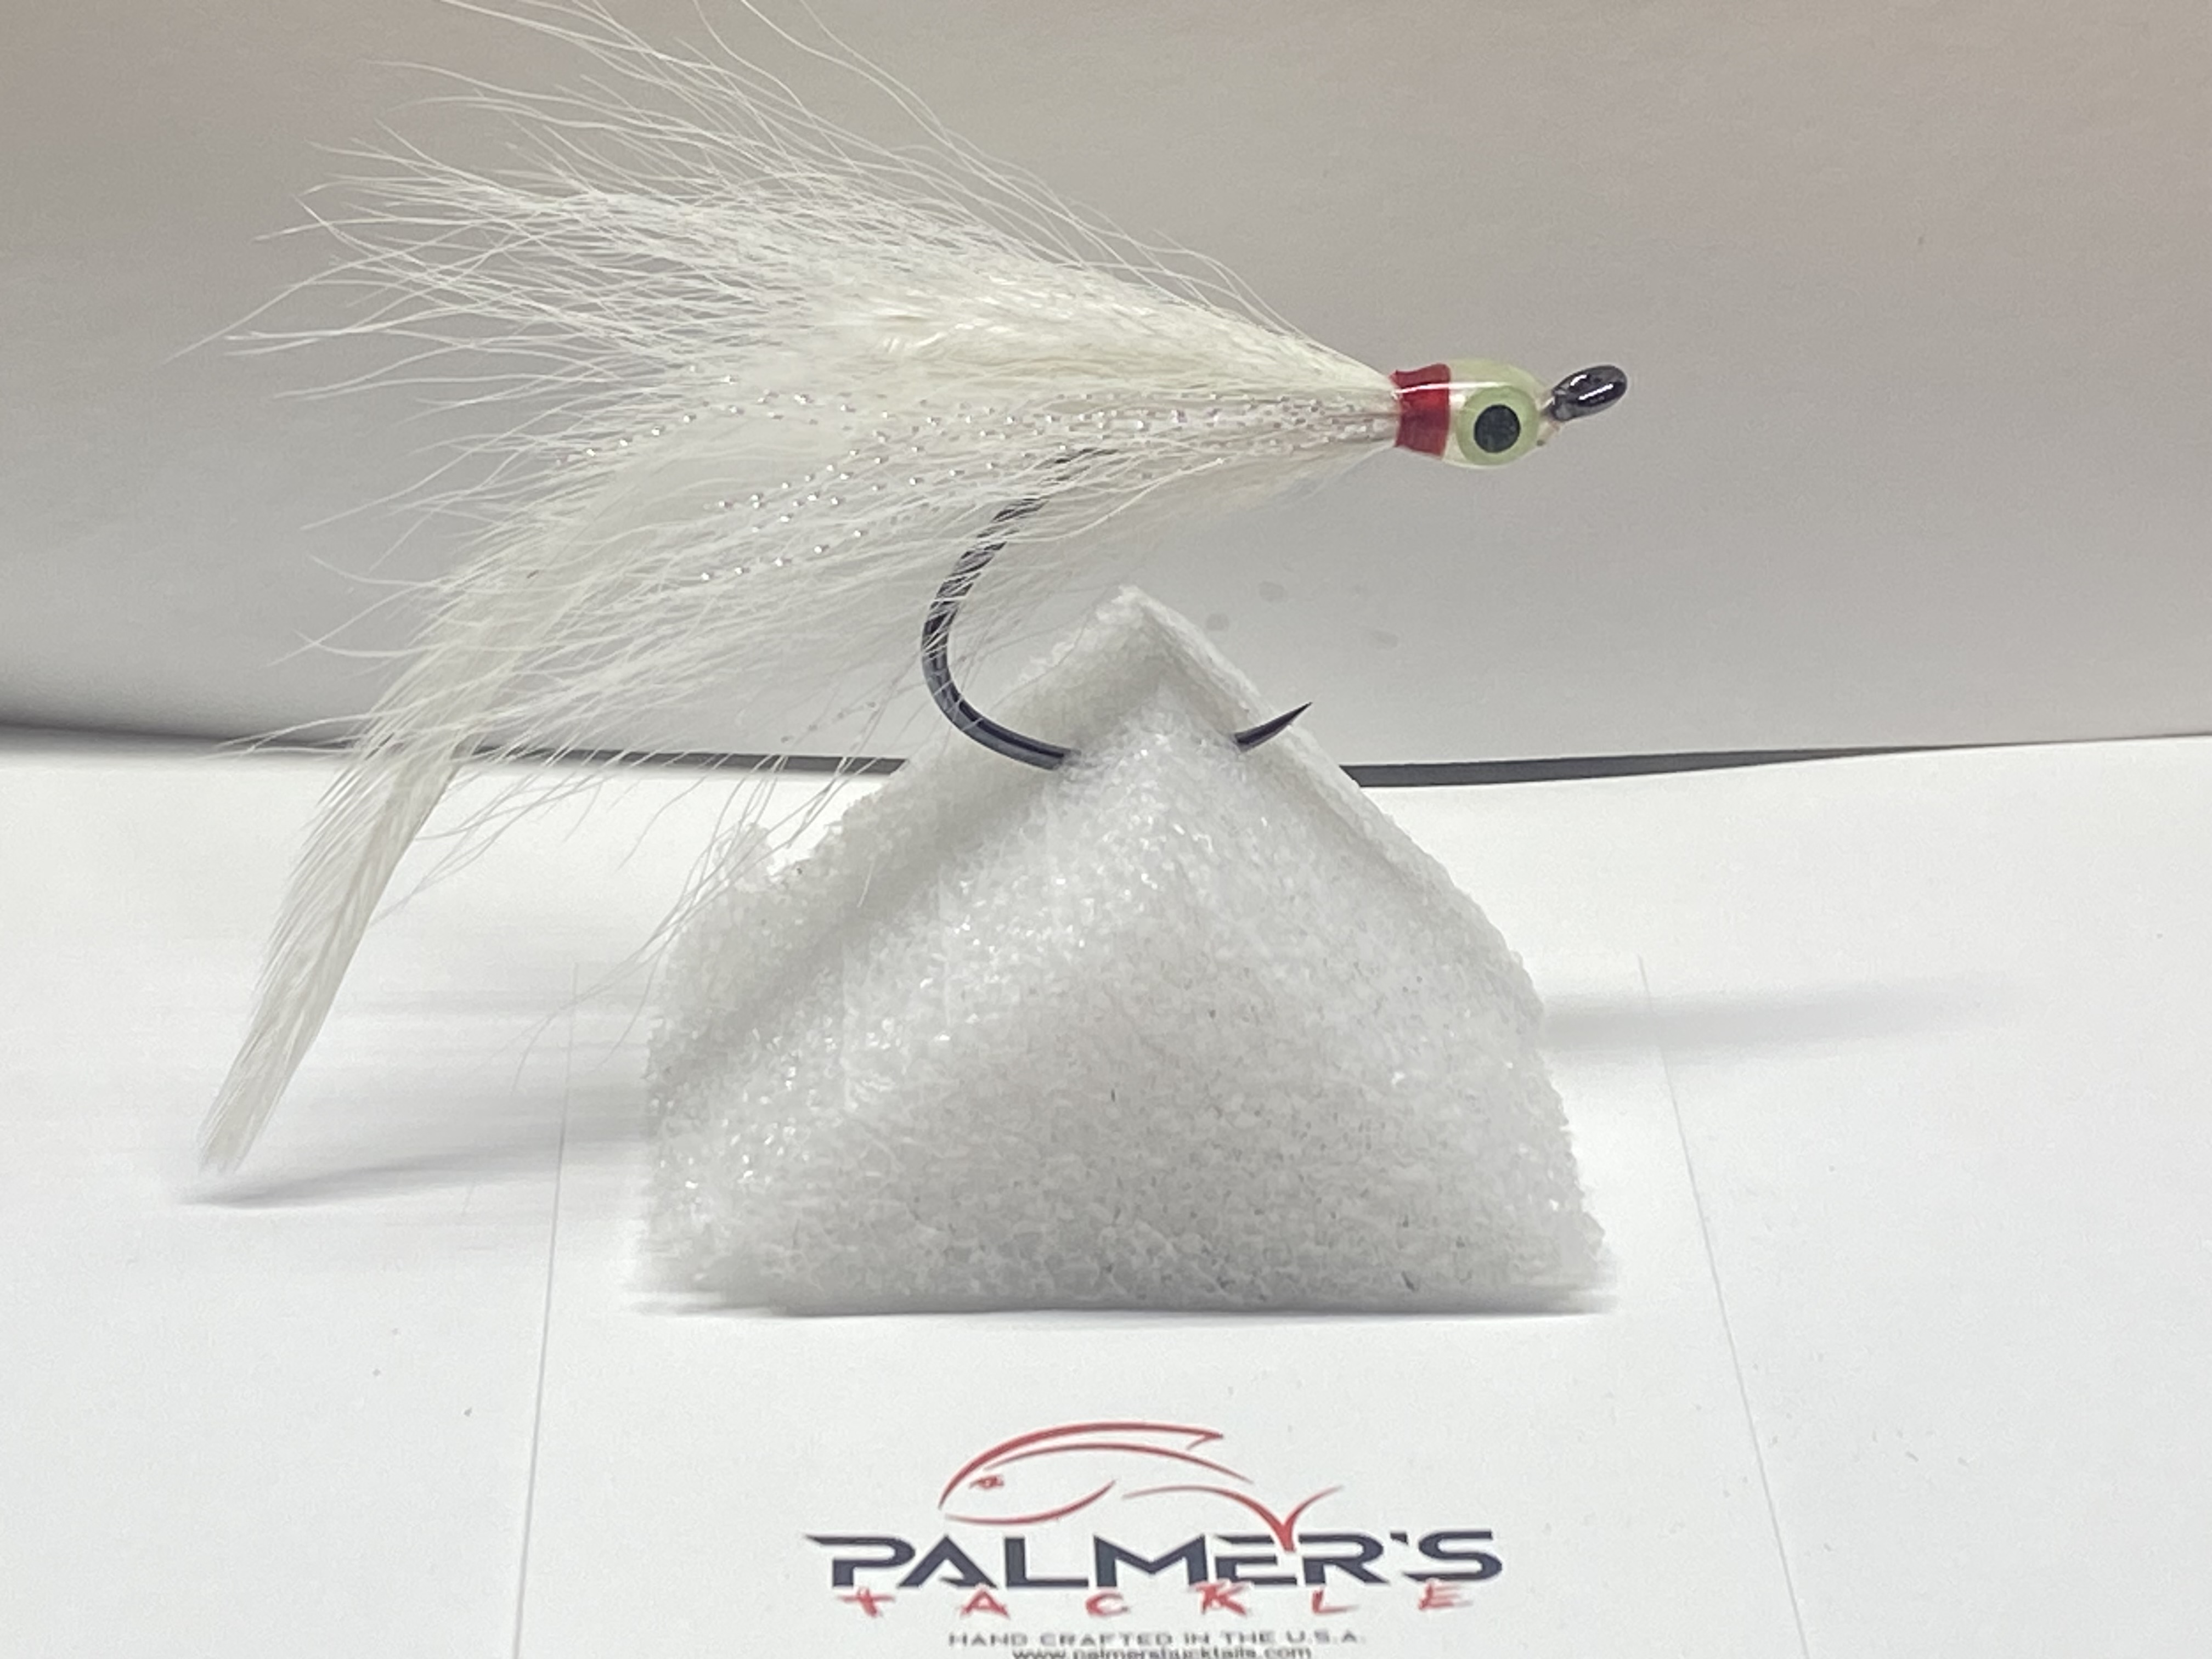 Bucktail Teasers with Hook Saltwater, Fishing Teaser Lures Fluke